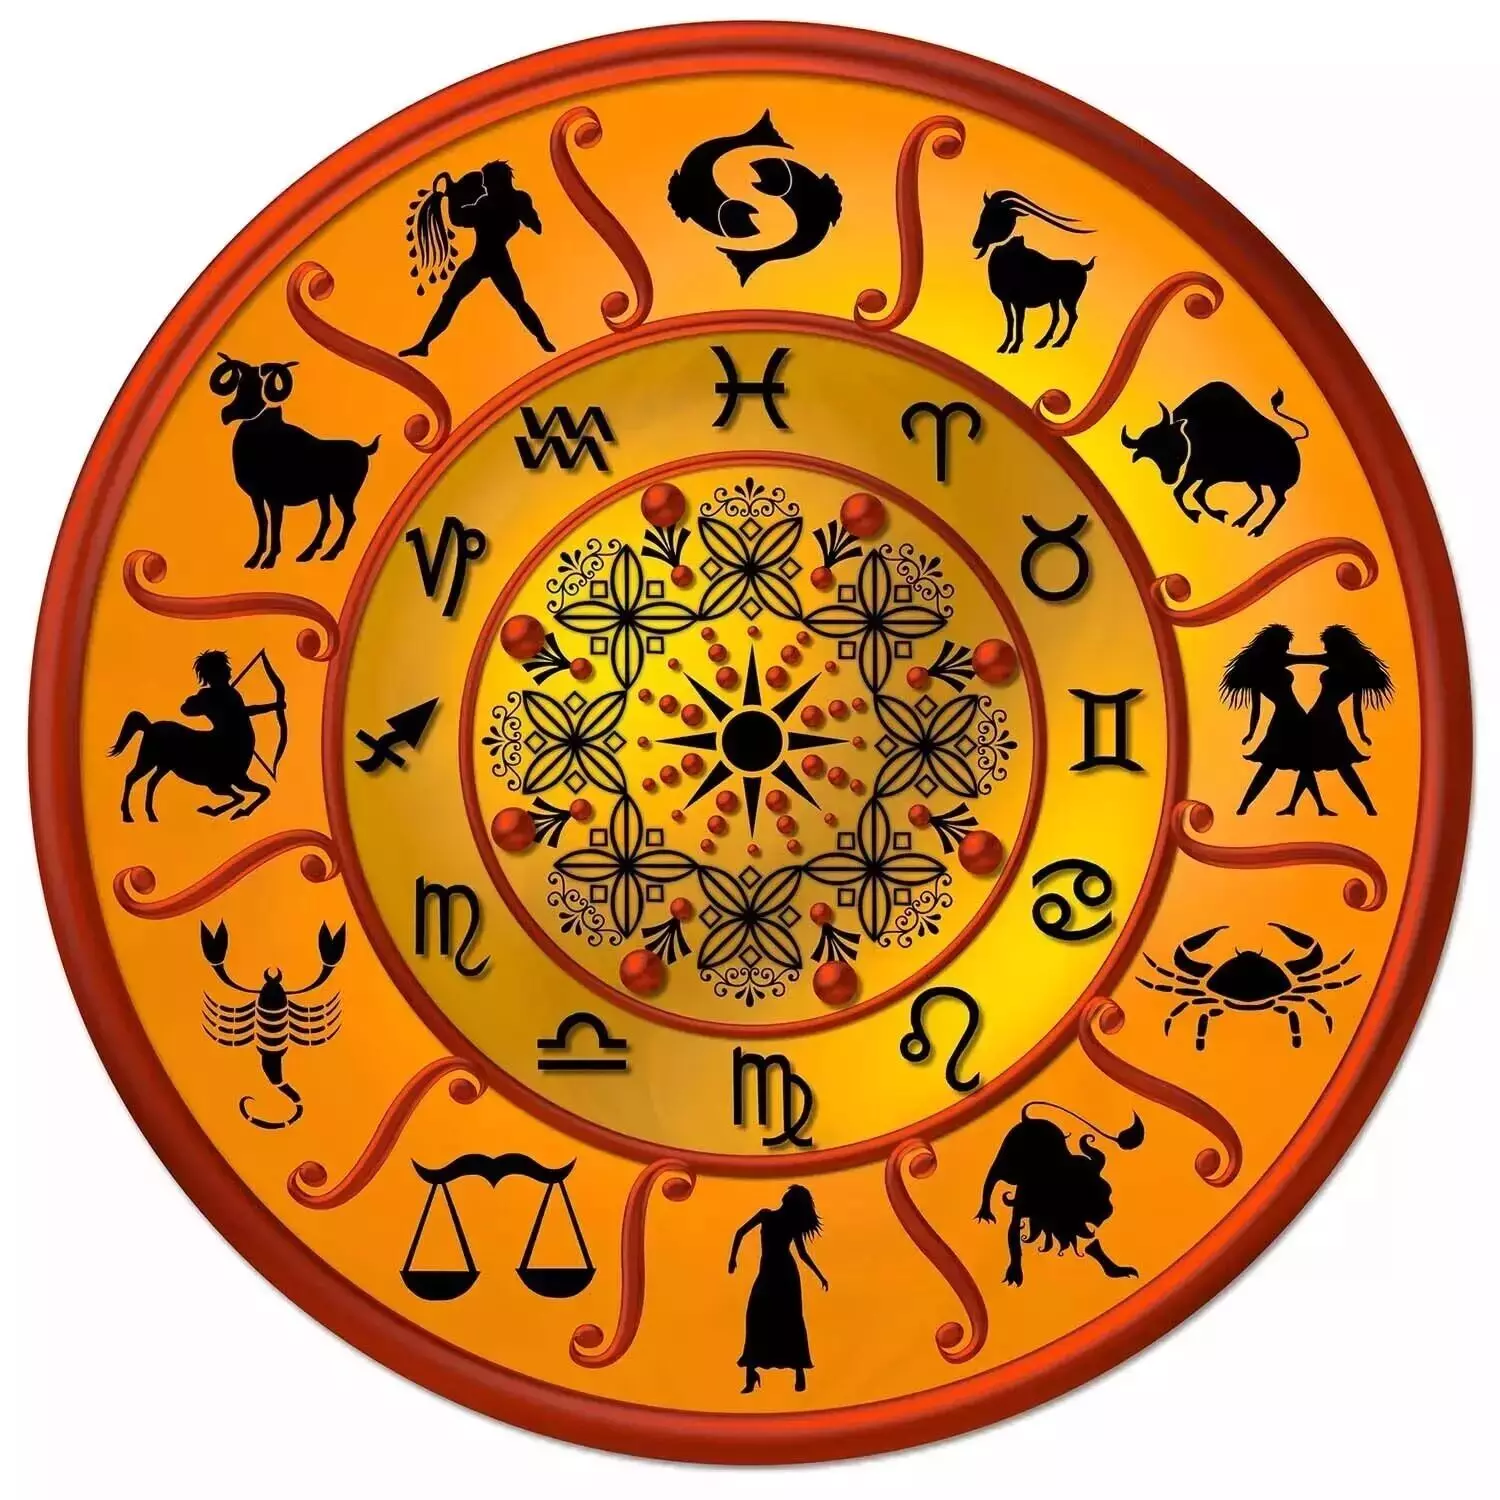 15 February – Know your todays horoscope